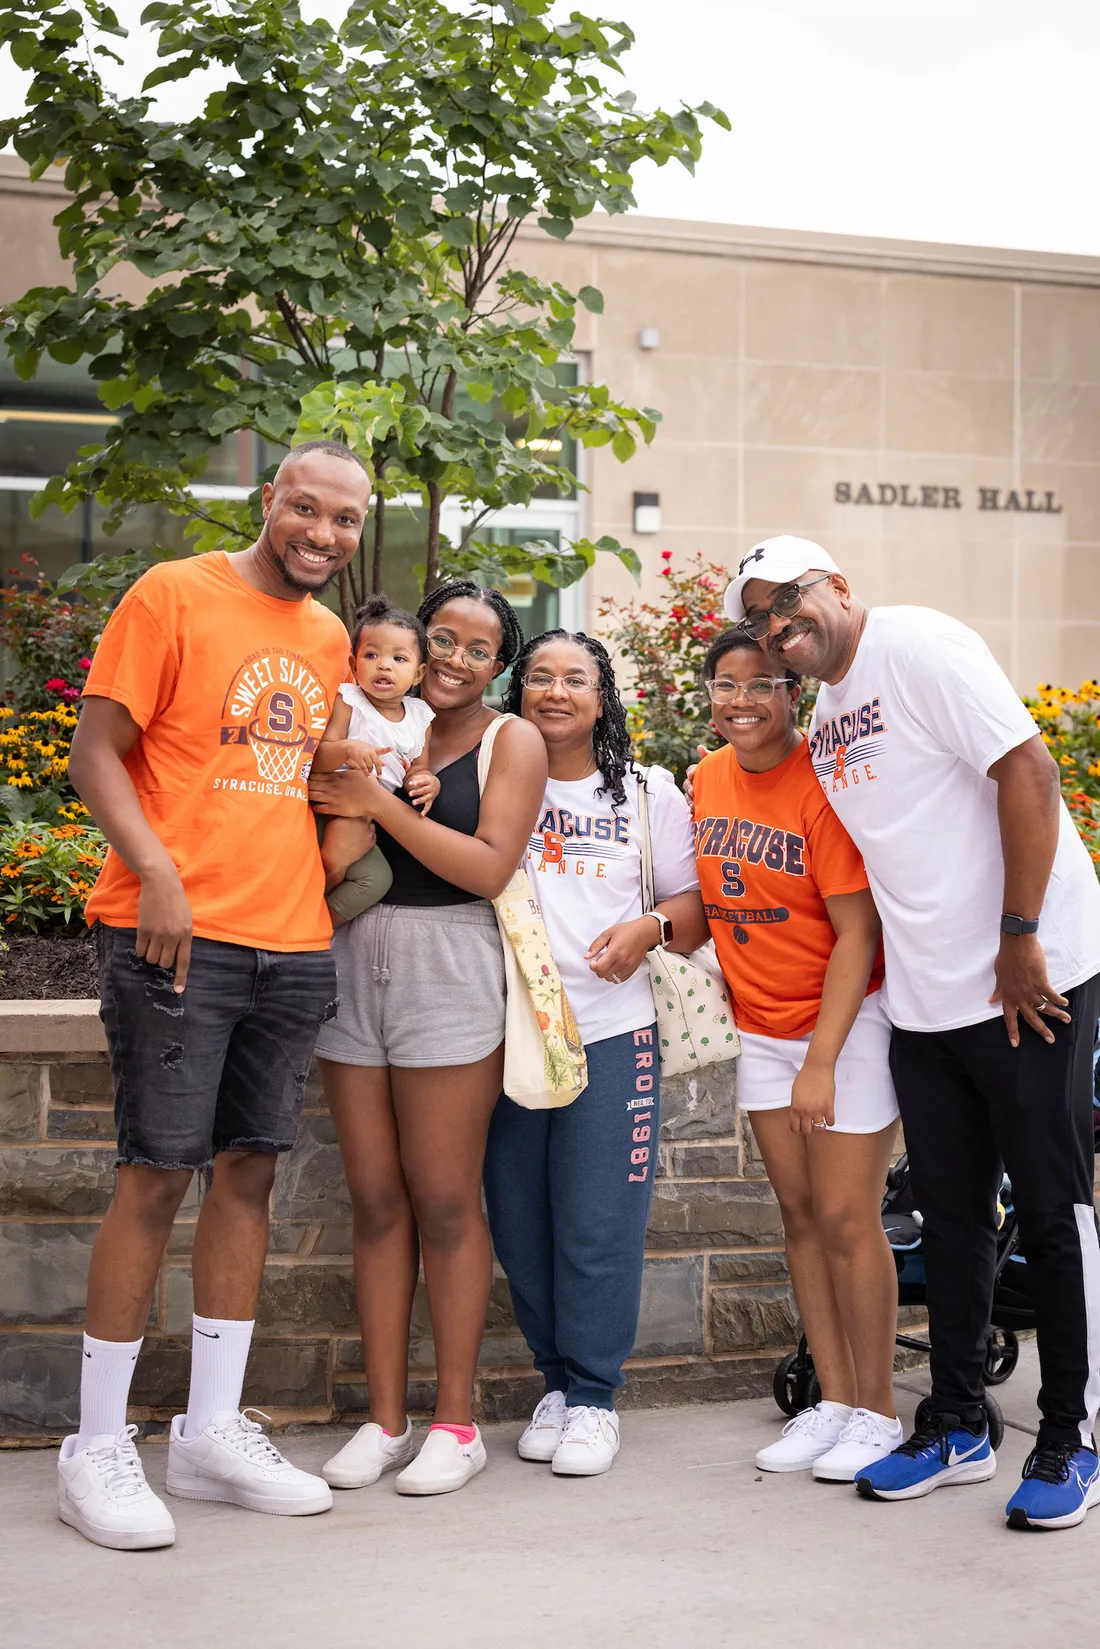 Family of 7 poses for photo together wearing Syracuse pride tee shirts.